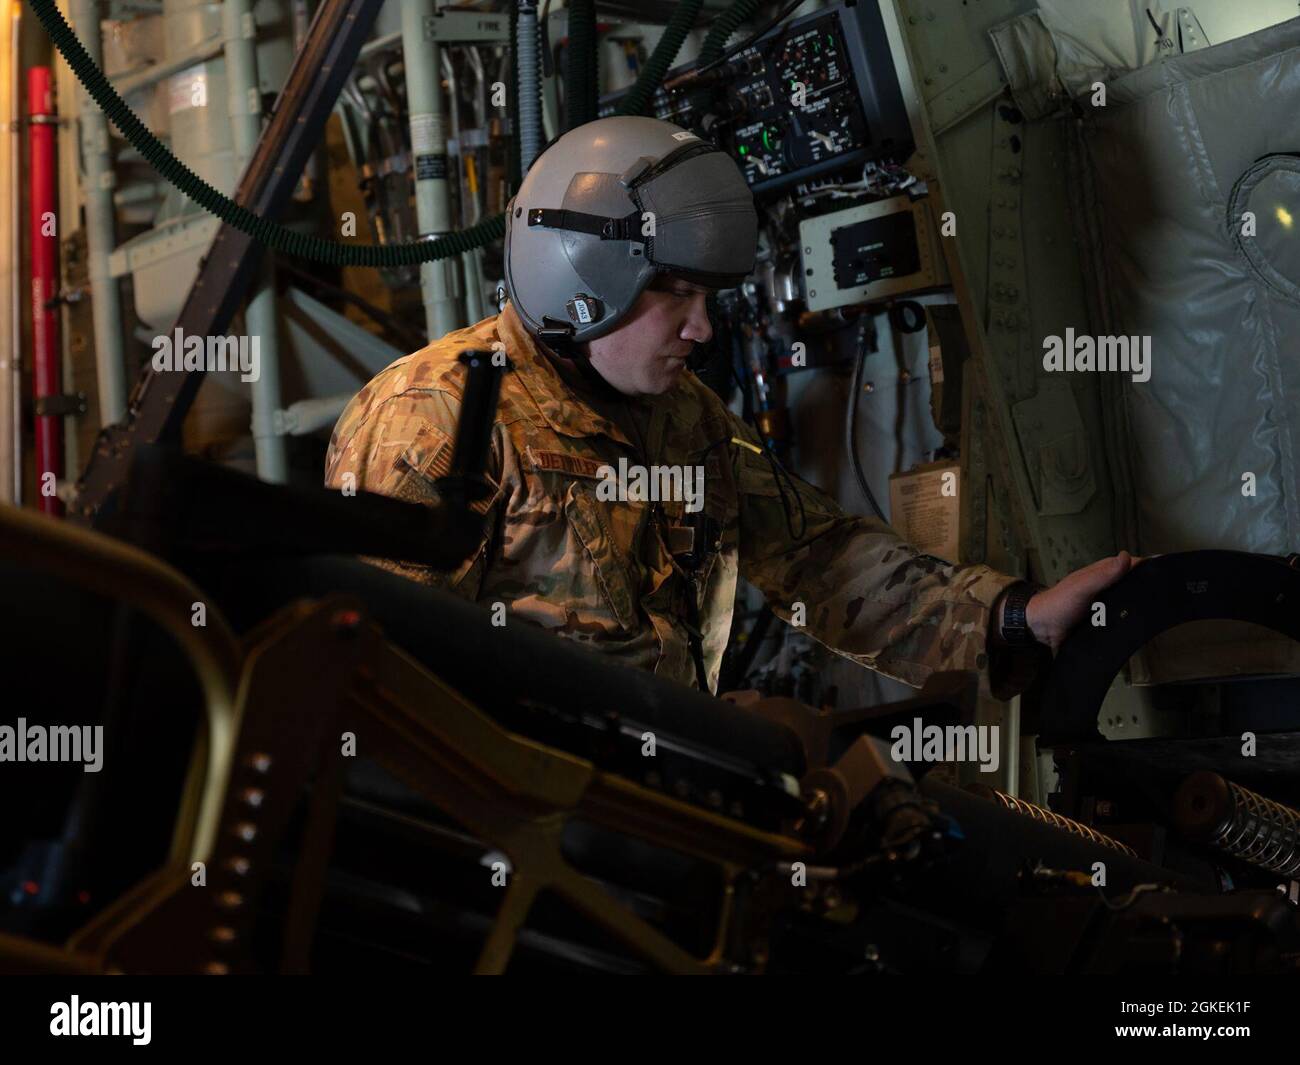 U.S. Air Force Tech. Sgt. Kyle Detwiler, a special missions aviator assigned to the 492nd Special Operations Wing, operates a 105mm cannon on an AC-130J Ghostrider gunship during a live-fire training mission over the Eglin Range, Florida, Mar. 31, 2021. The 492nd SOW conducts qualification flight training and specialized combat training. They are responsible for assessing, educating and professionally developing Airmen and rapidly developing innovative courses and technologies to meet emerging Air Force Special Operations Command requirements. Stock Photo